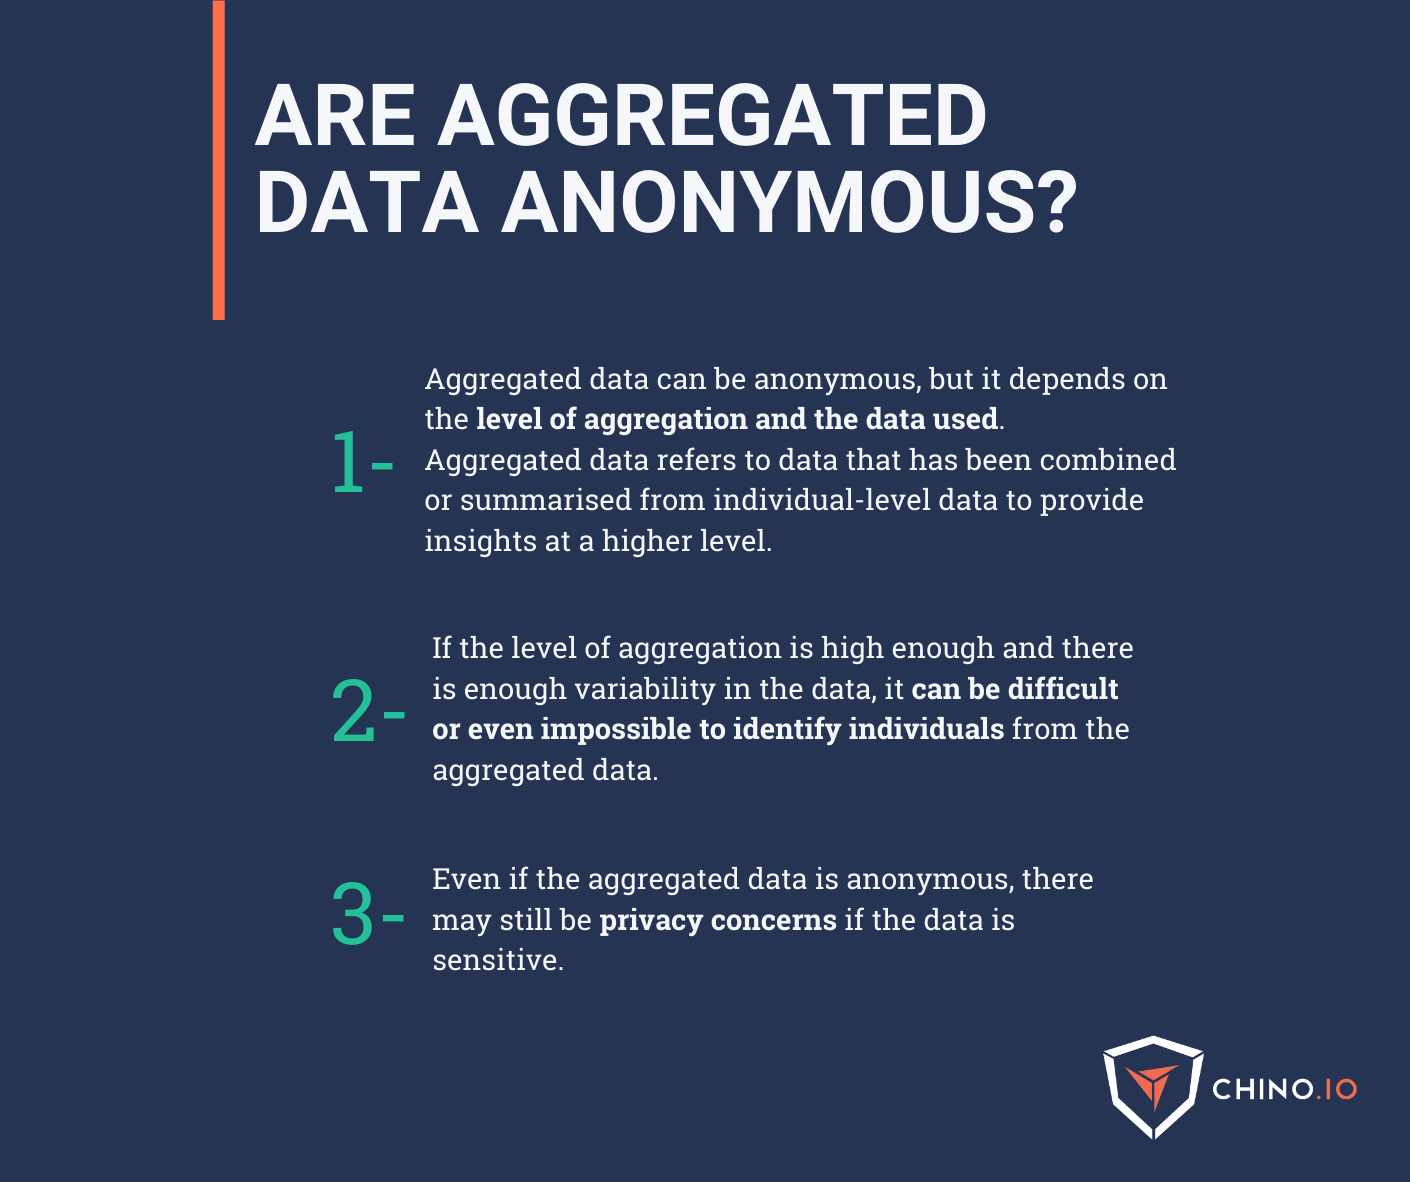 Image on blue background that says "Are aggregated data anonymous?"